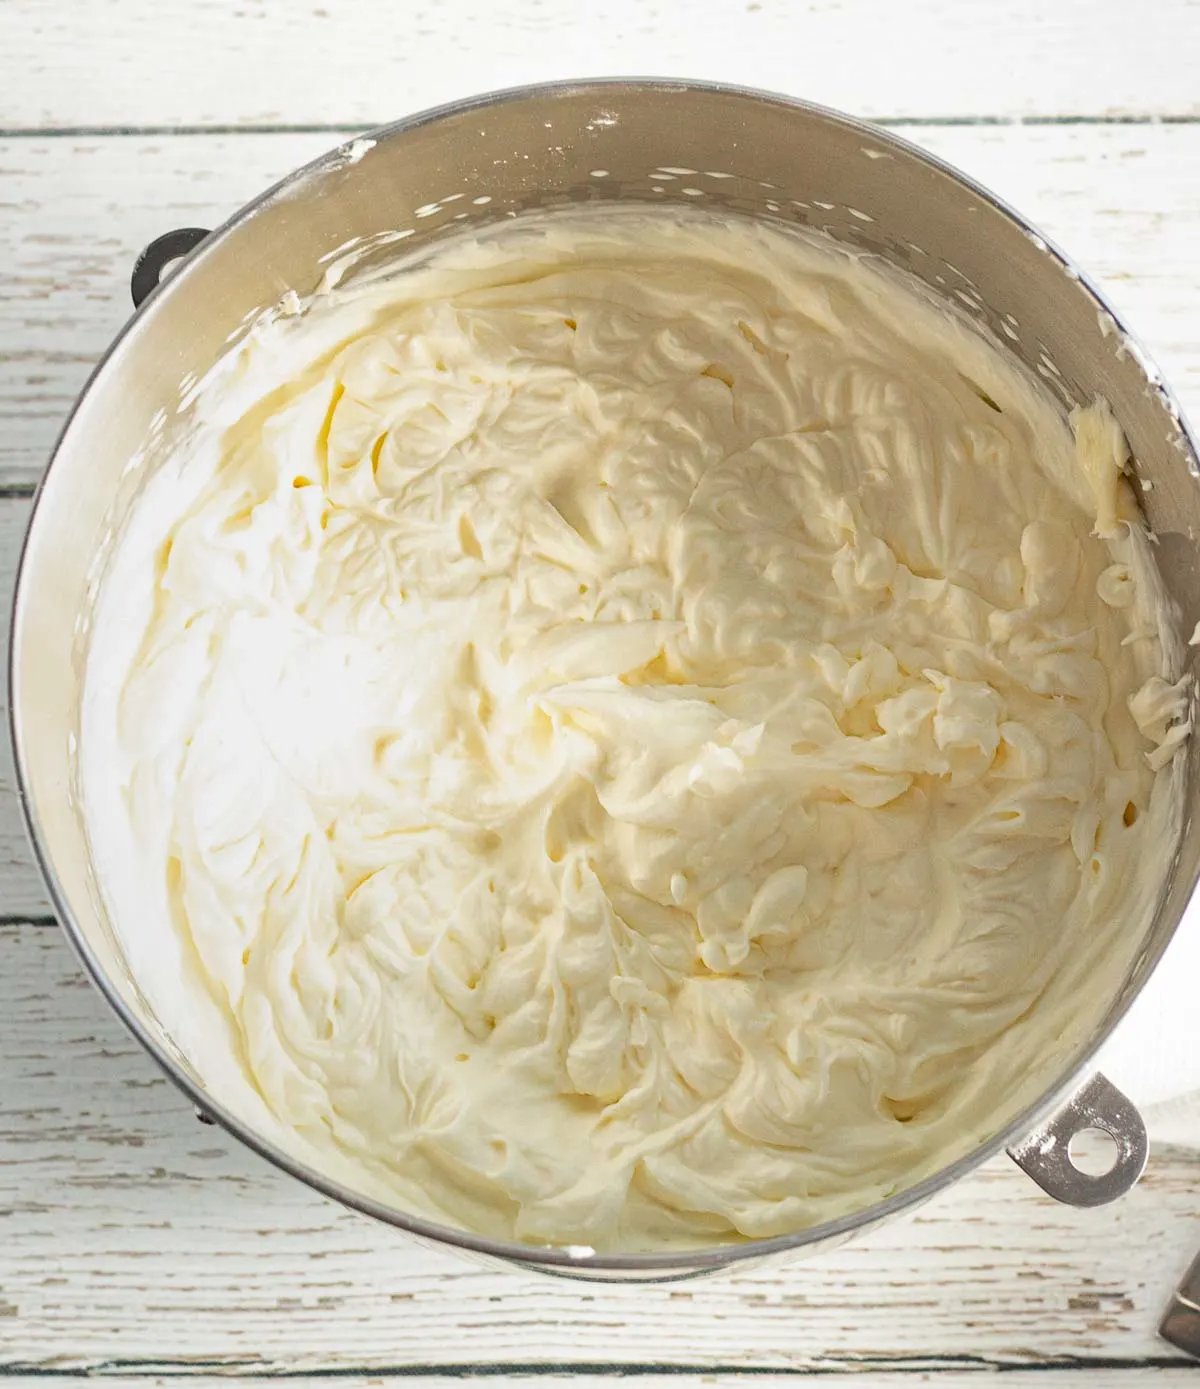 Making cream cheese icing in a bowl.